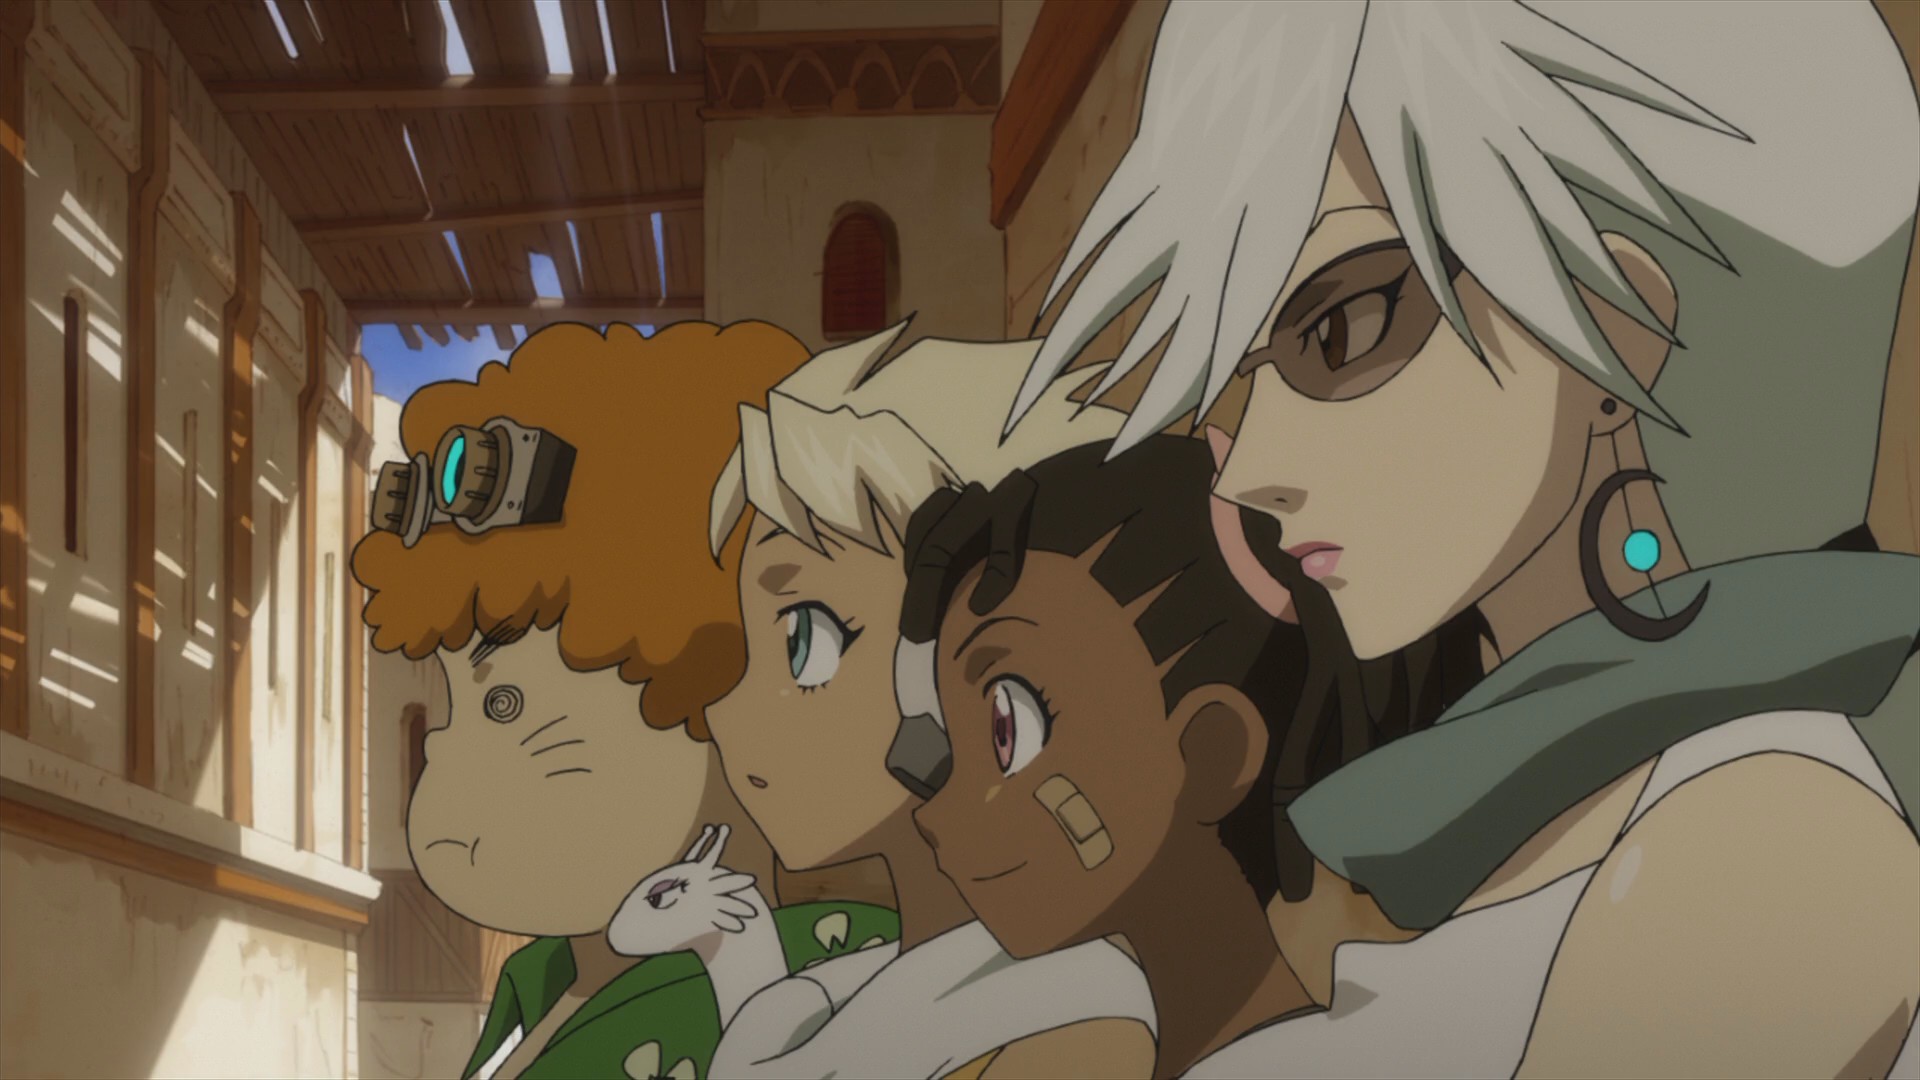 Four of Dan’s allies: Bel, an overweight boy with goggles; Sela, a young athletic girl; Miyuki, a young girl with a band-aid on her face; and Haruka, a woman with white hair and sunglasses.